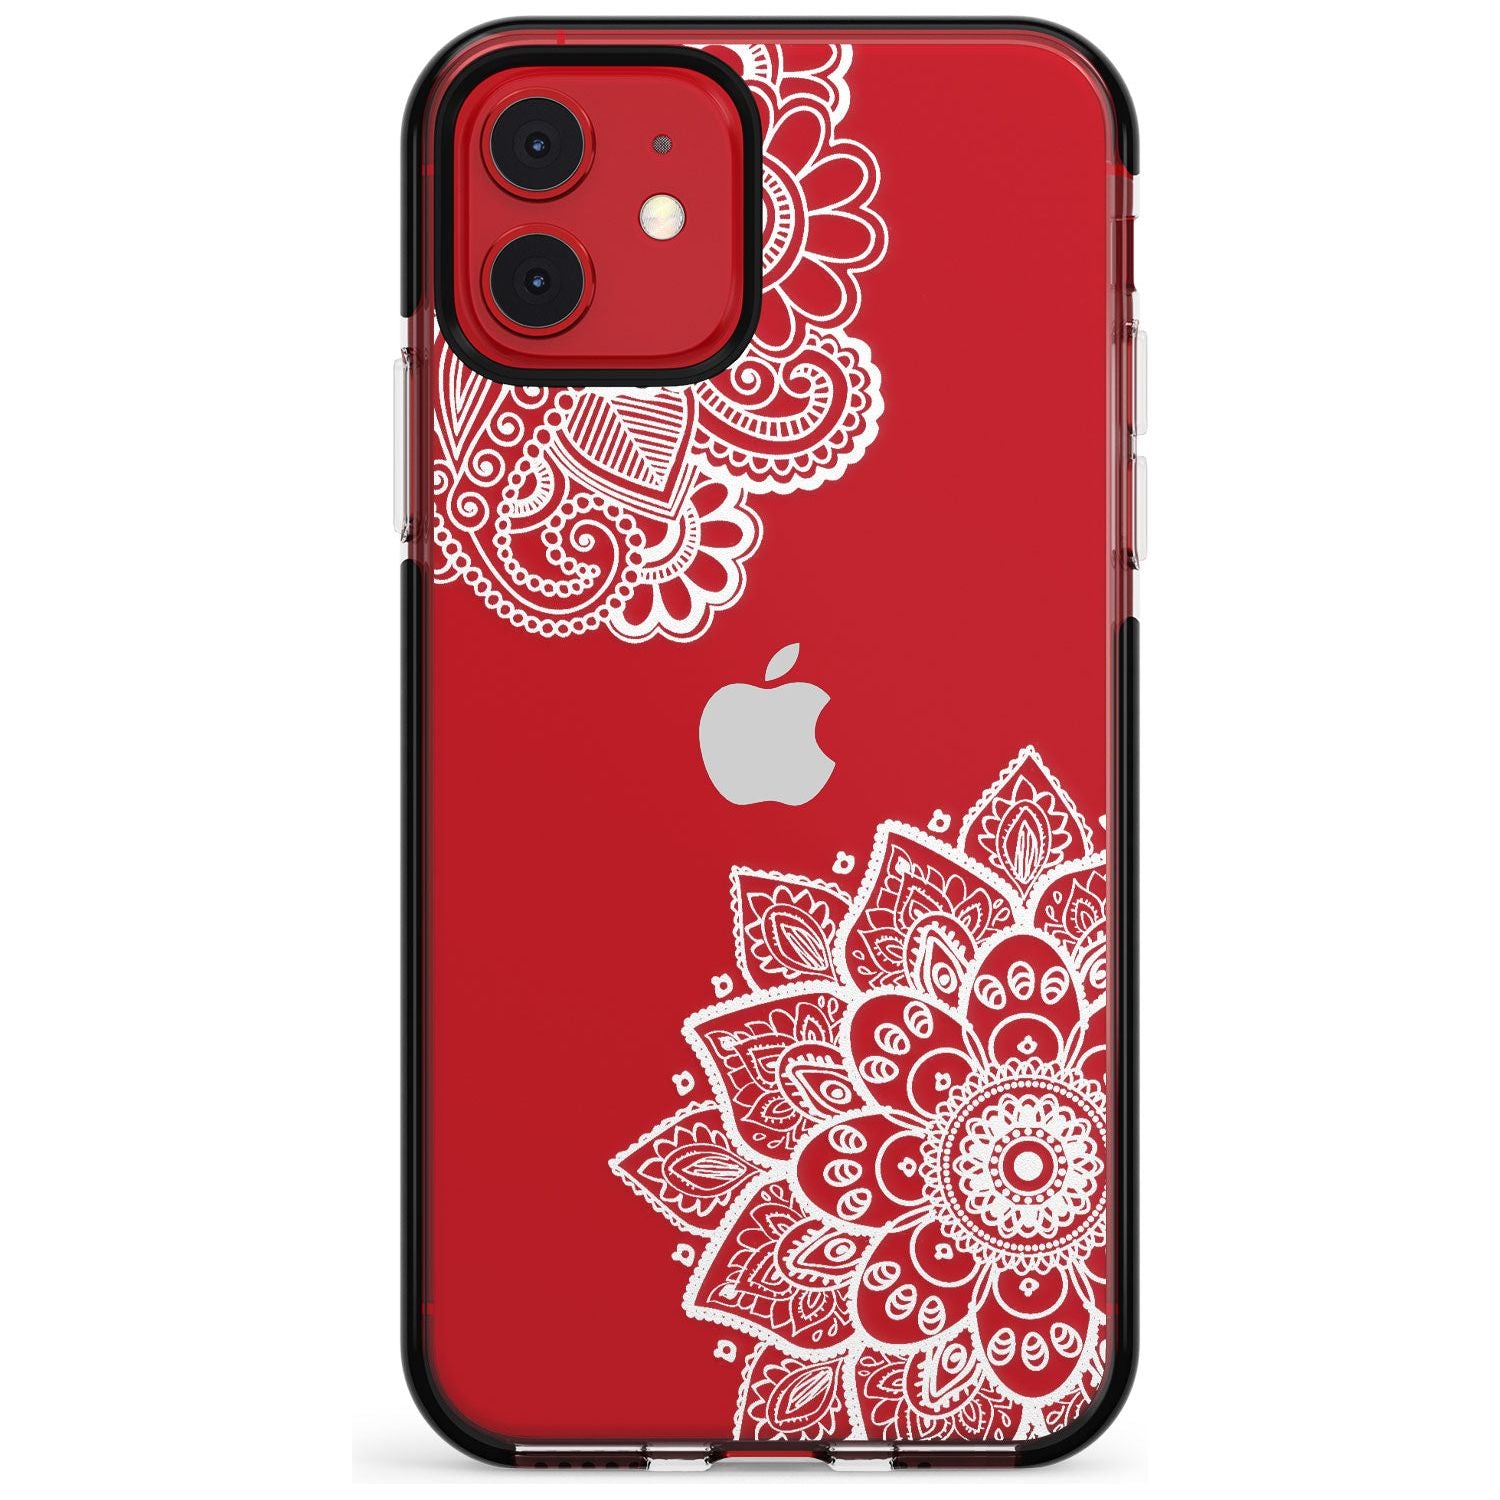 White Henna Florals Black Impact Phone Case for iPhone 11 Pro Max